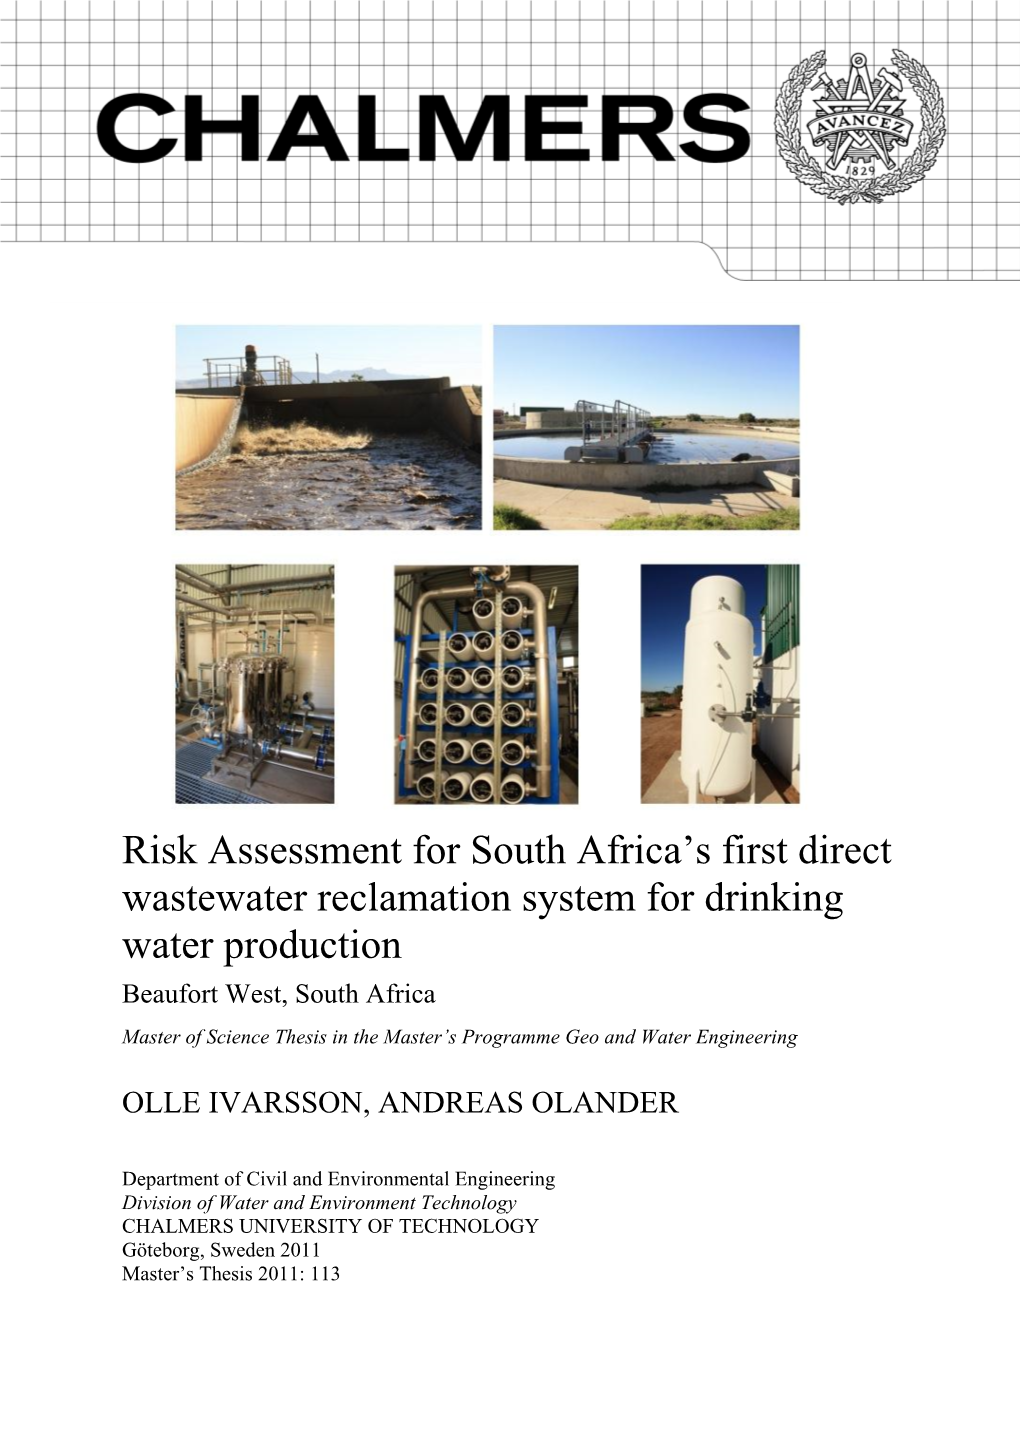 Risk Analysis for Reclamation Plant in Beaufort West, South Africa